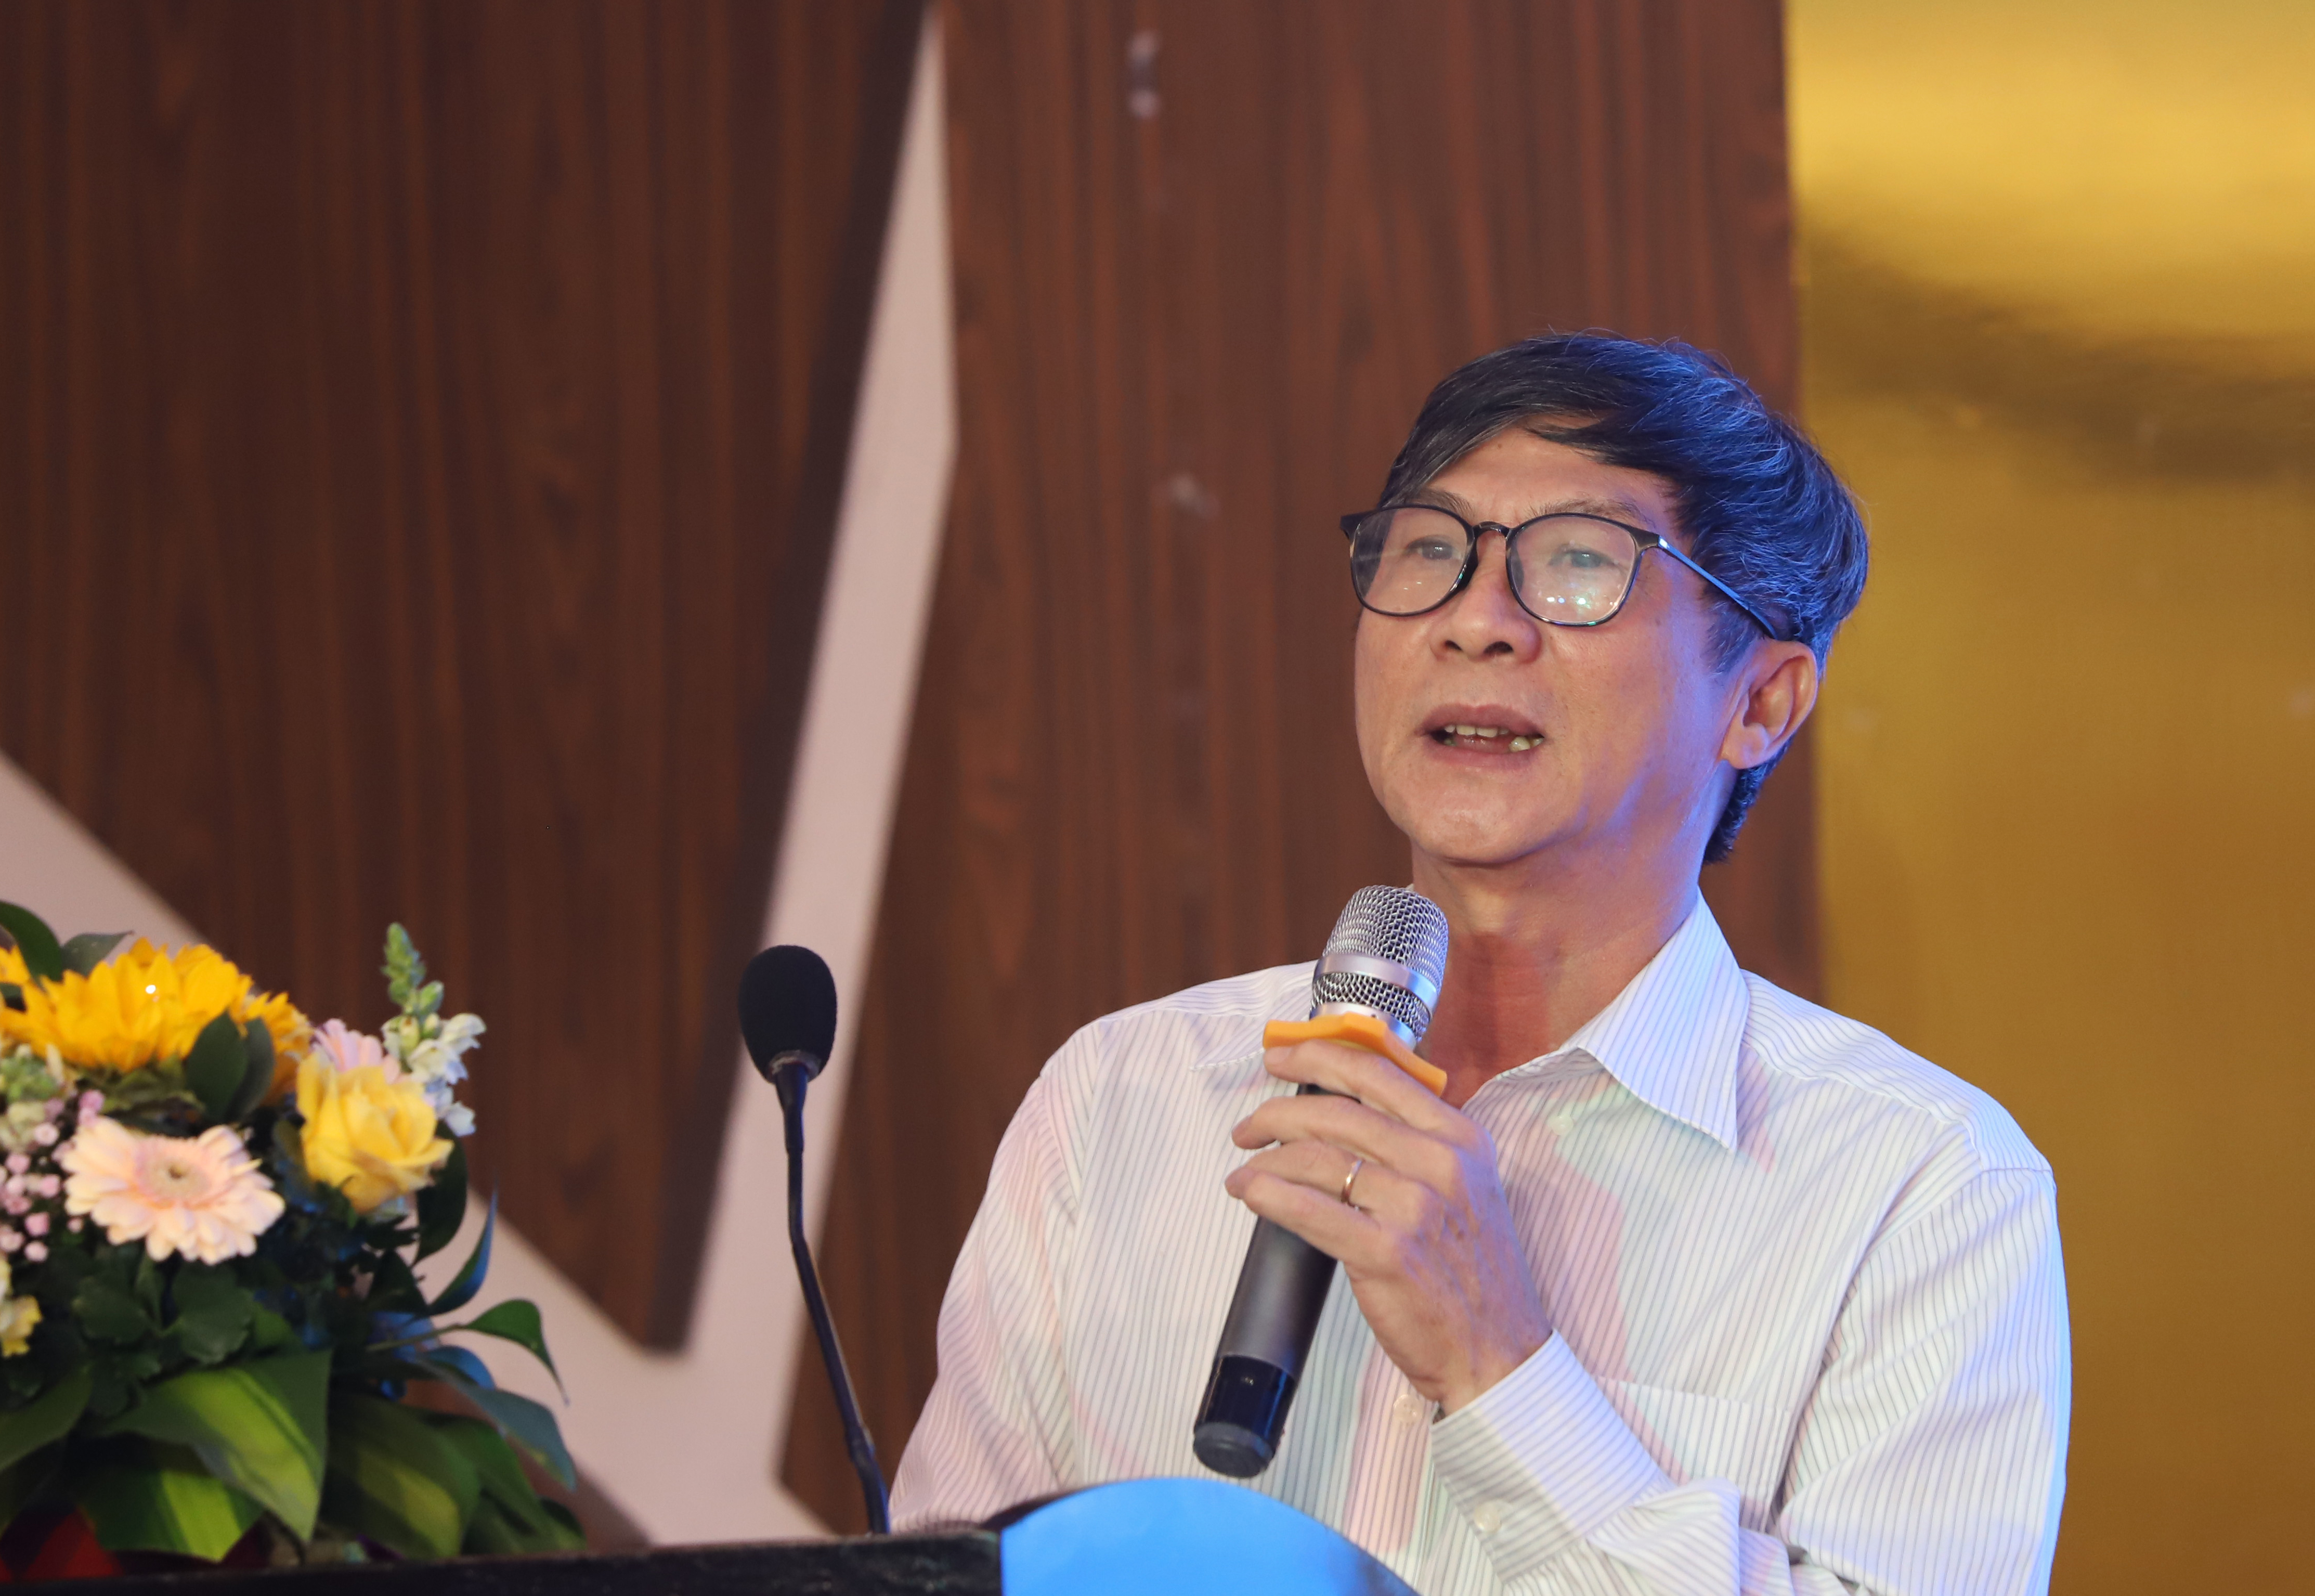 Truong Dinh Hoe, secretary-general of the Vietnam Association of Seafood Exporters and Producers (VASEP), speaks at a seminar in Can Tho City, Vietnam, November 26, 2022. Photo: Chi Quoc / Tuoi Tre